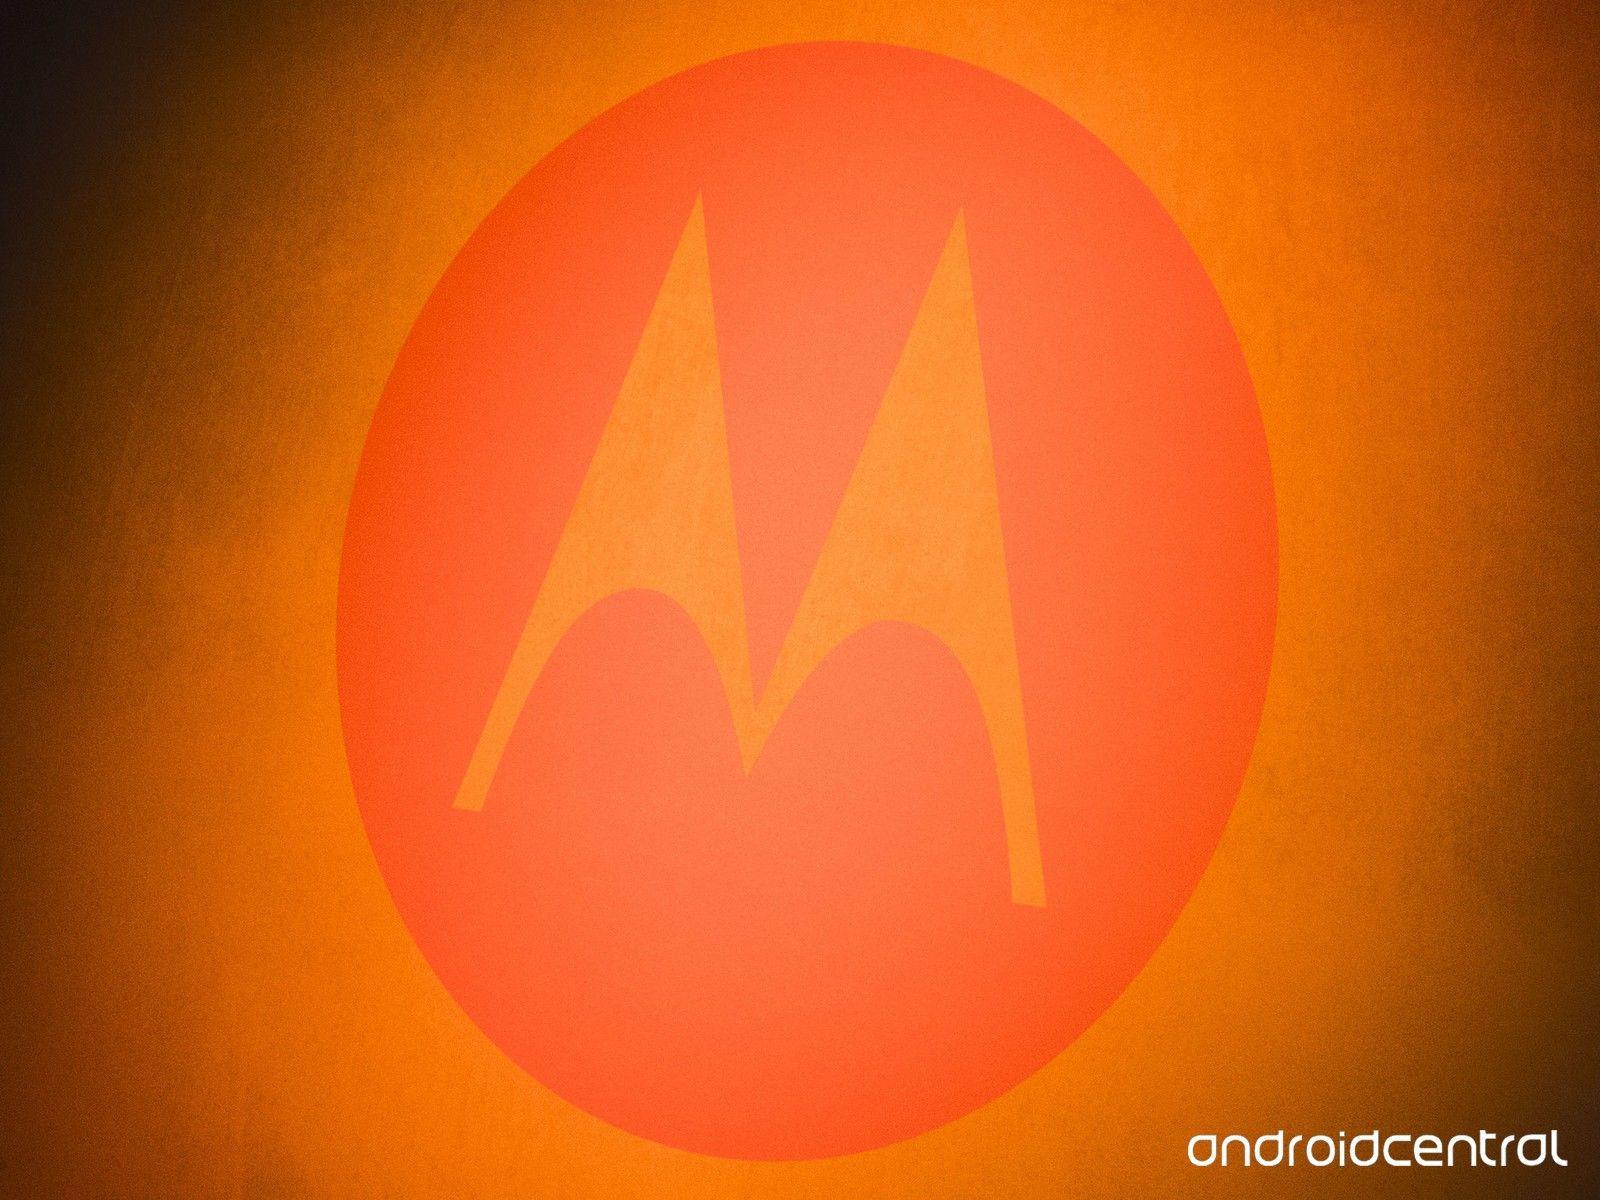 First Motorola Logo - Moto G successor spotted on Indian import database | Android Central